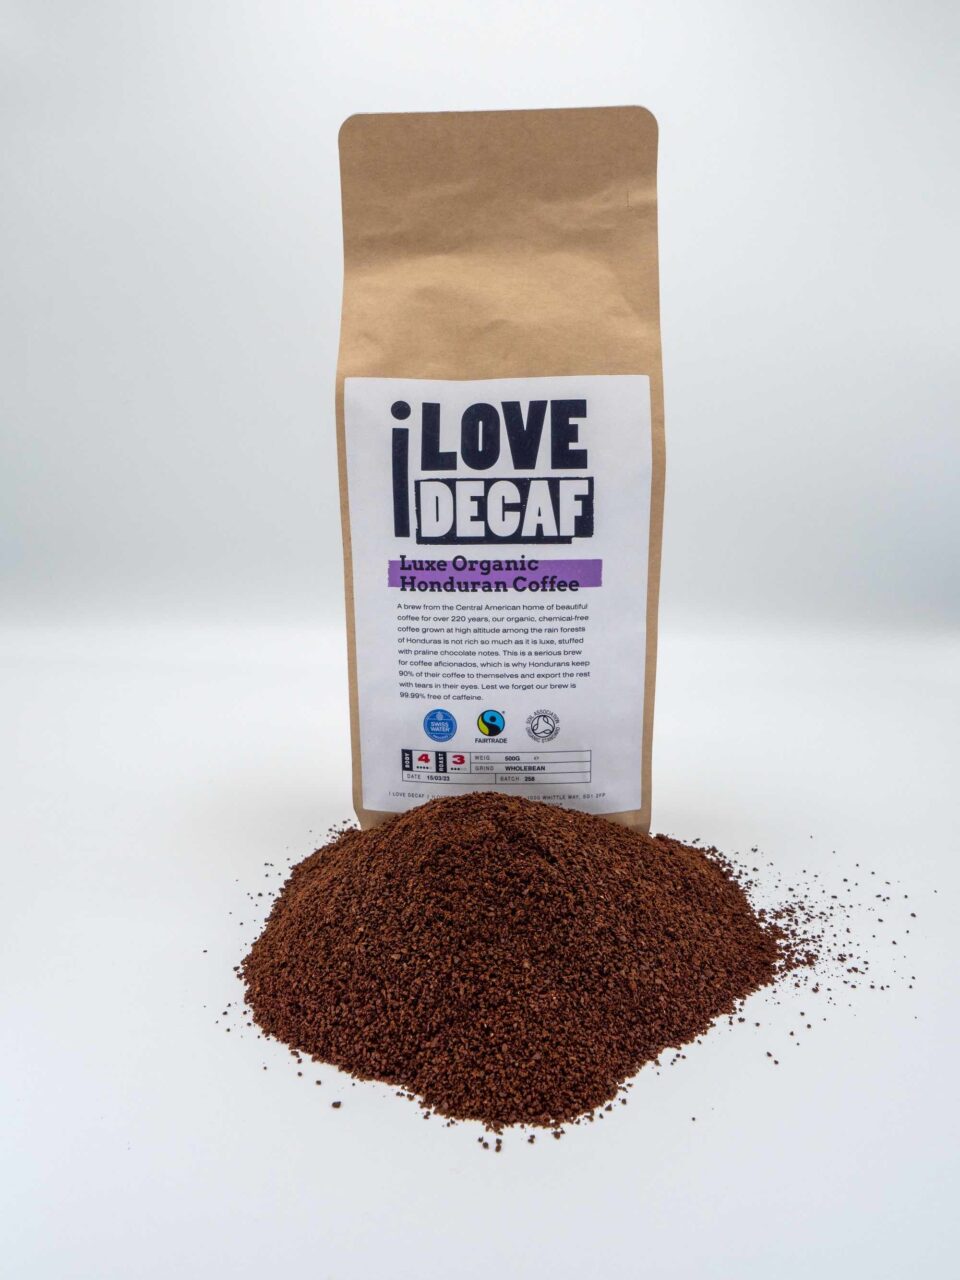 Luxe organic ground decaf coffee scaled